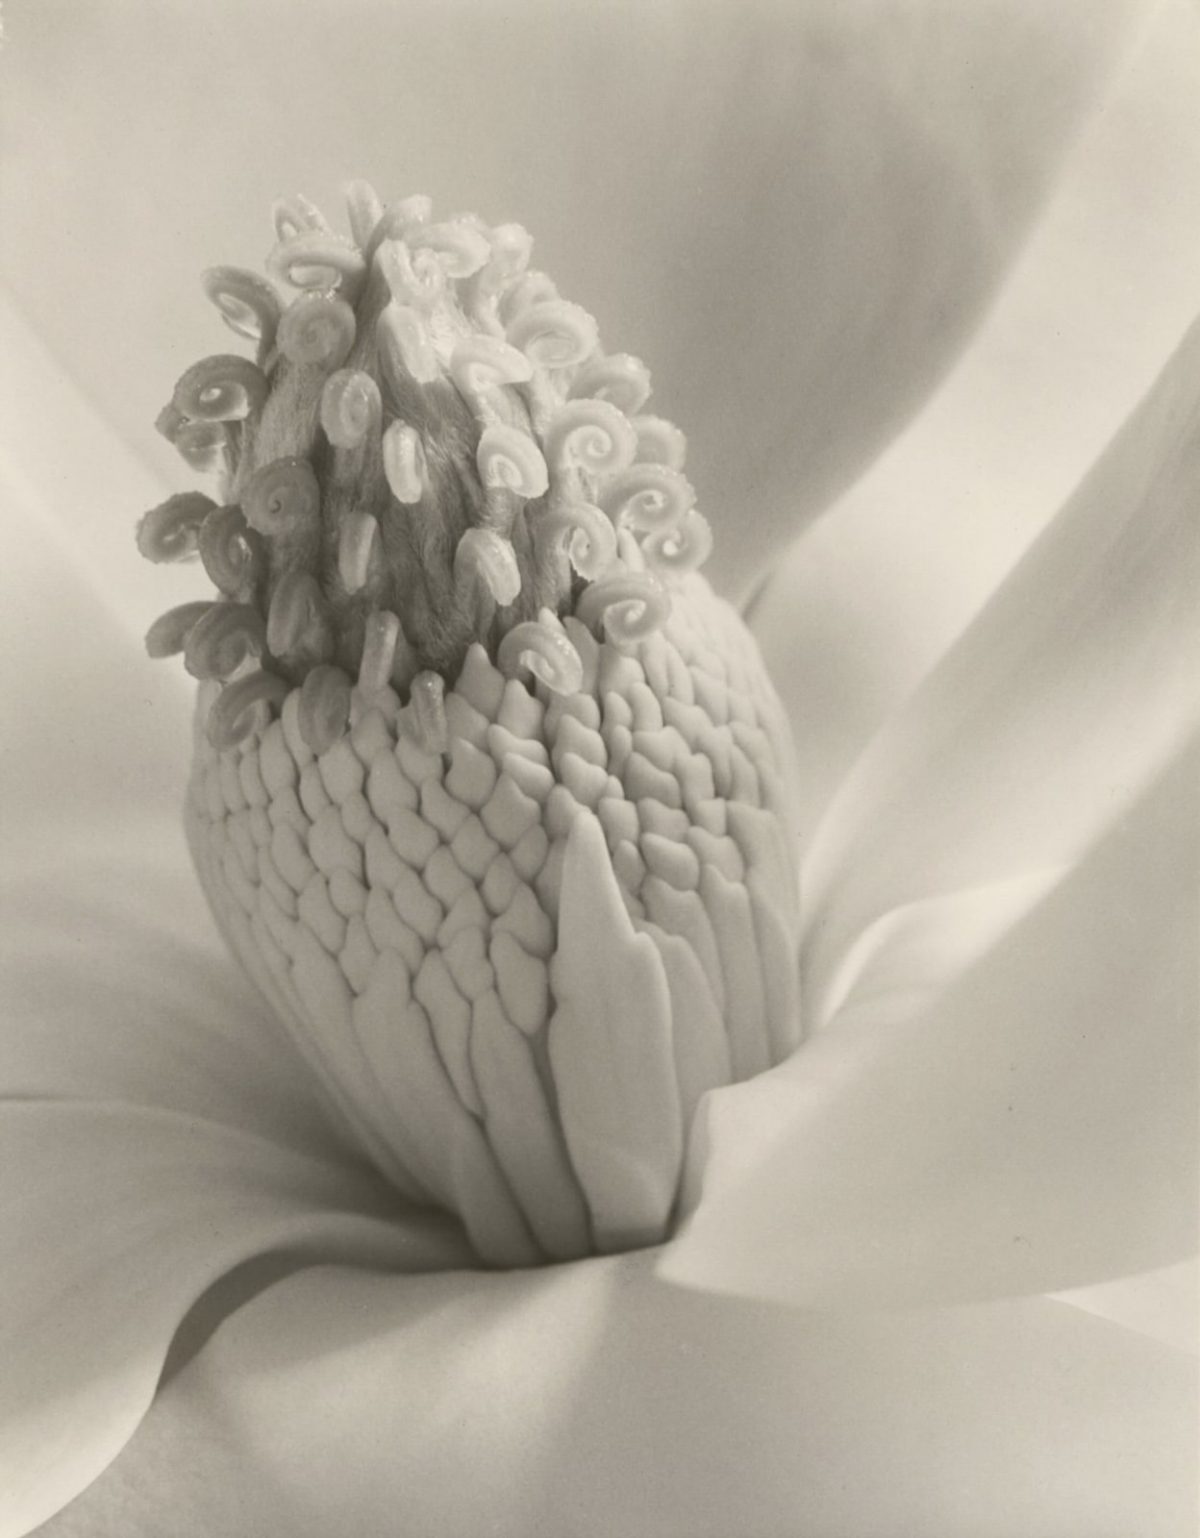 Imogen Cunningham Sublime Close-Up Botanical Photos from the 1920s and 1930s